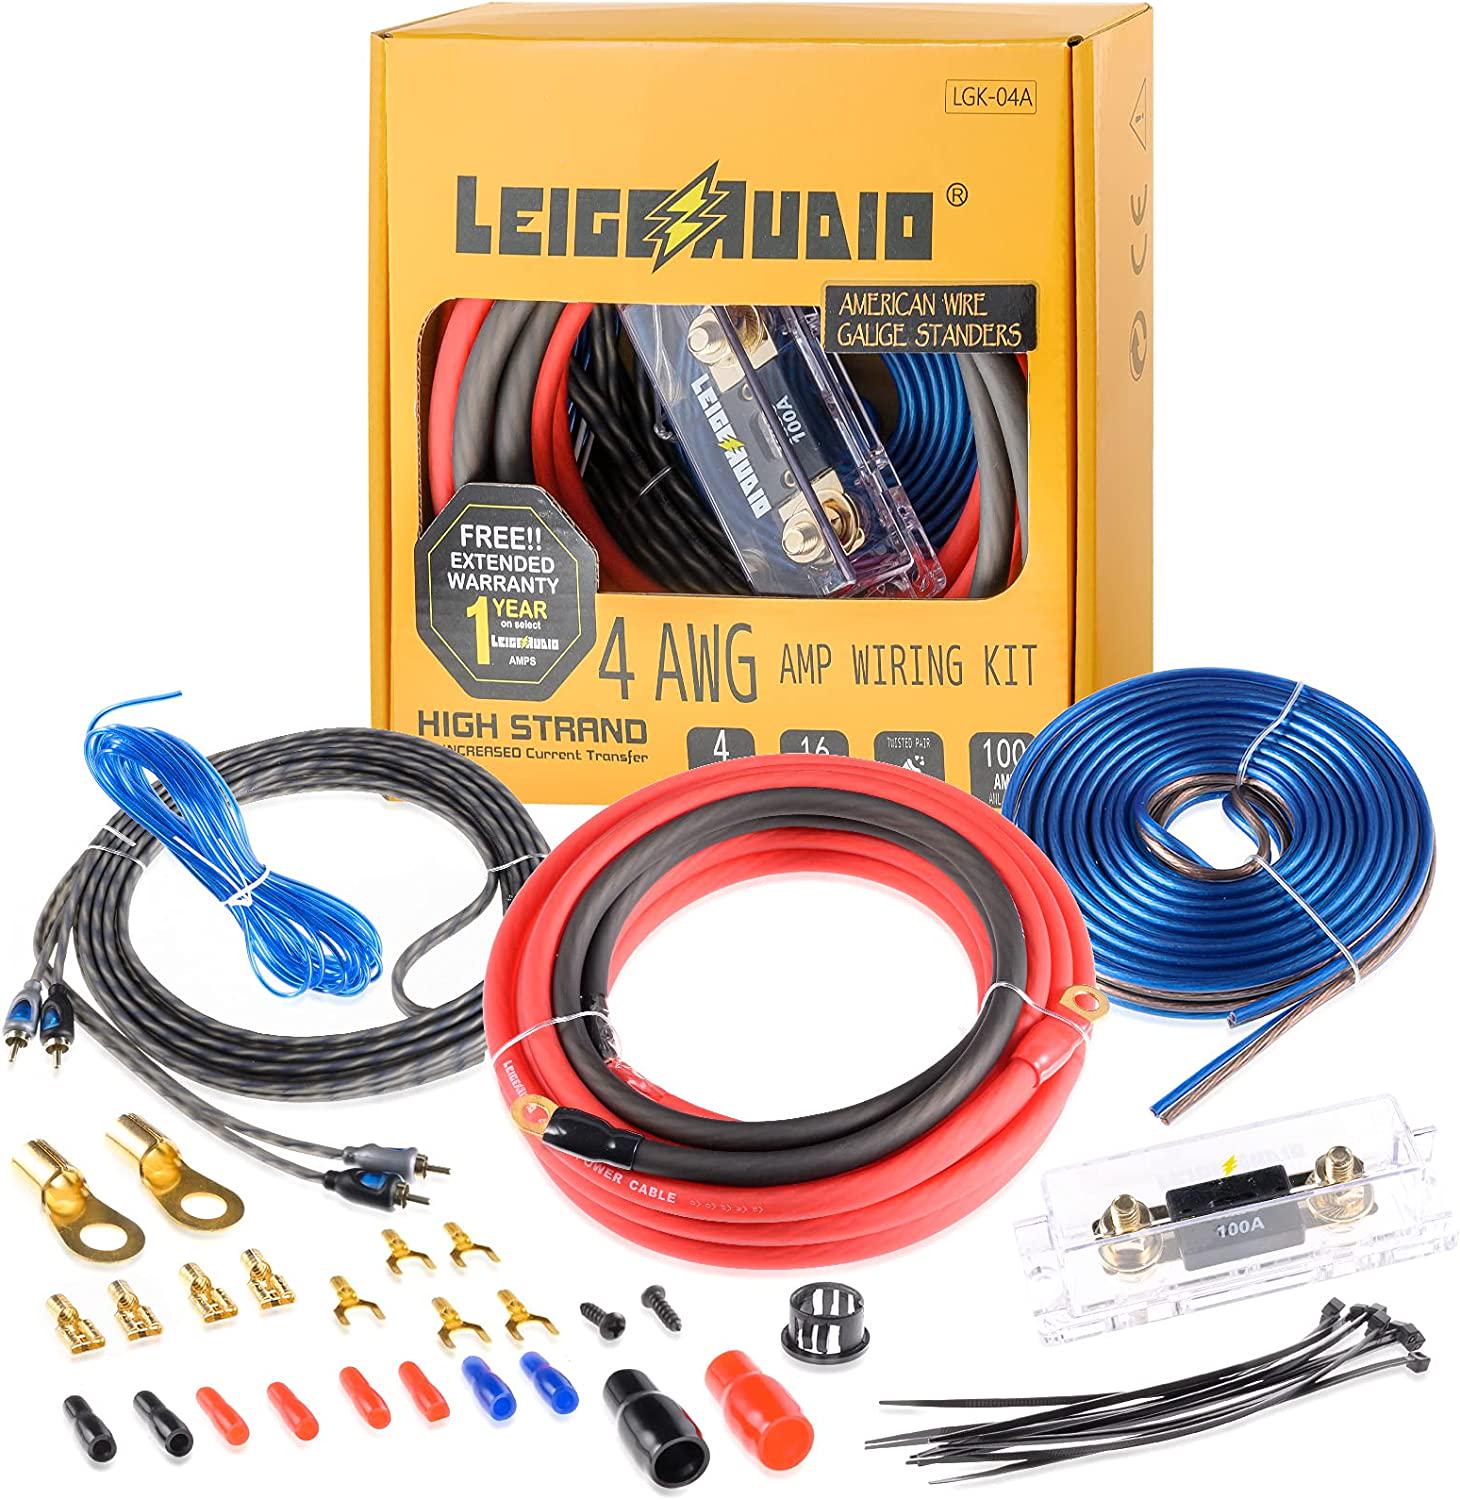 LEIGESAUDIO, LEIGESAUDIO 4 Gauge Amp Wiring Kit Ture 4 AWG Amplifier Installation Wiring Kit - Car Subwoofer Wiring Kit Helps You Make Connections and Brings Power to Your Radio, Subwoofer and Speakers